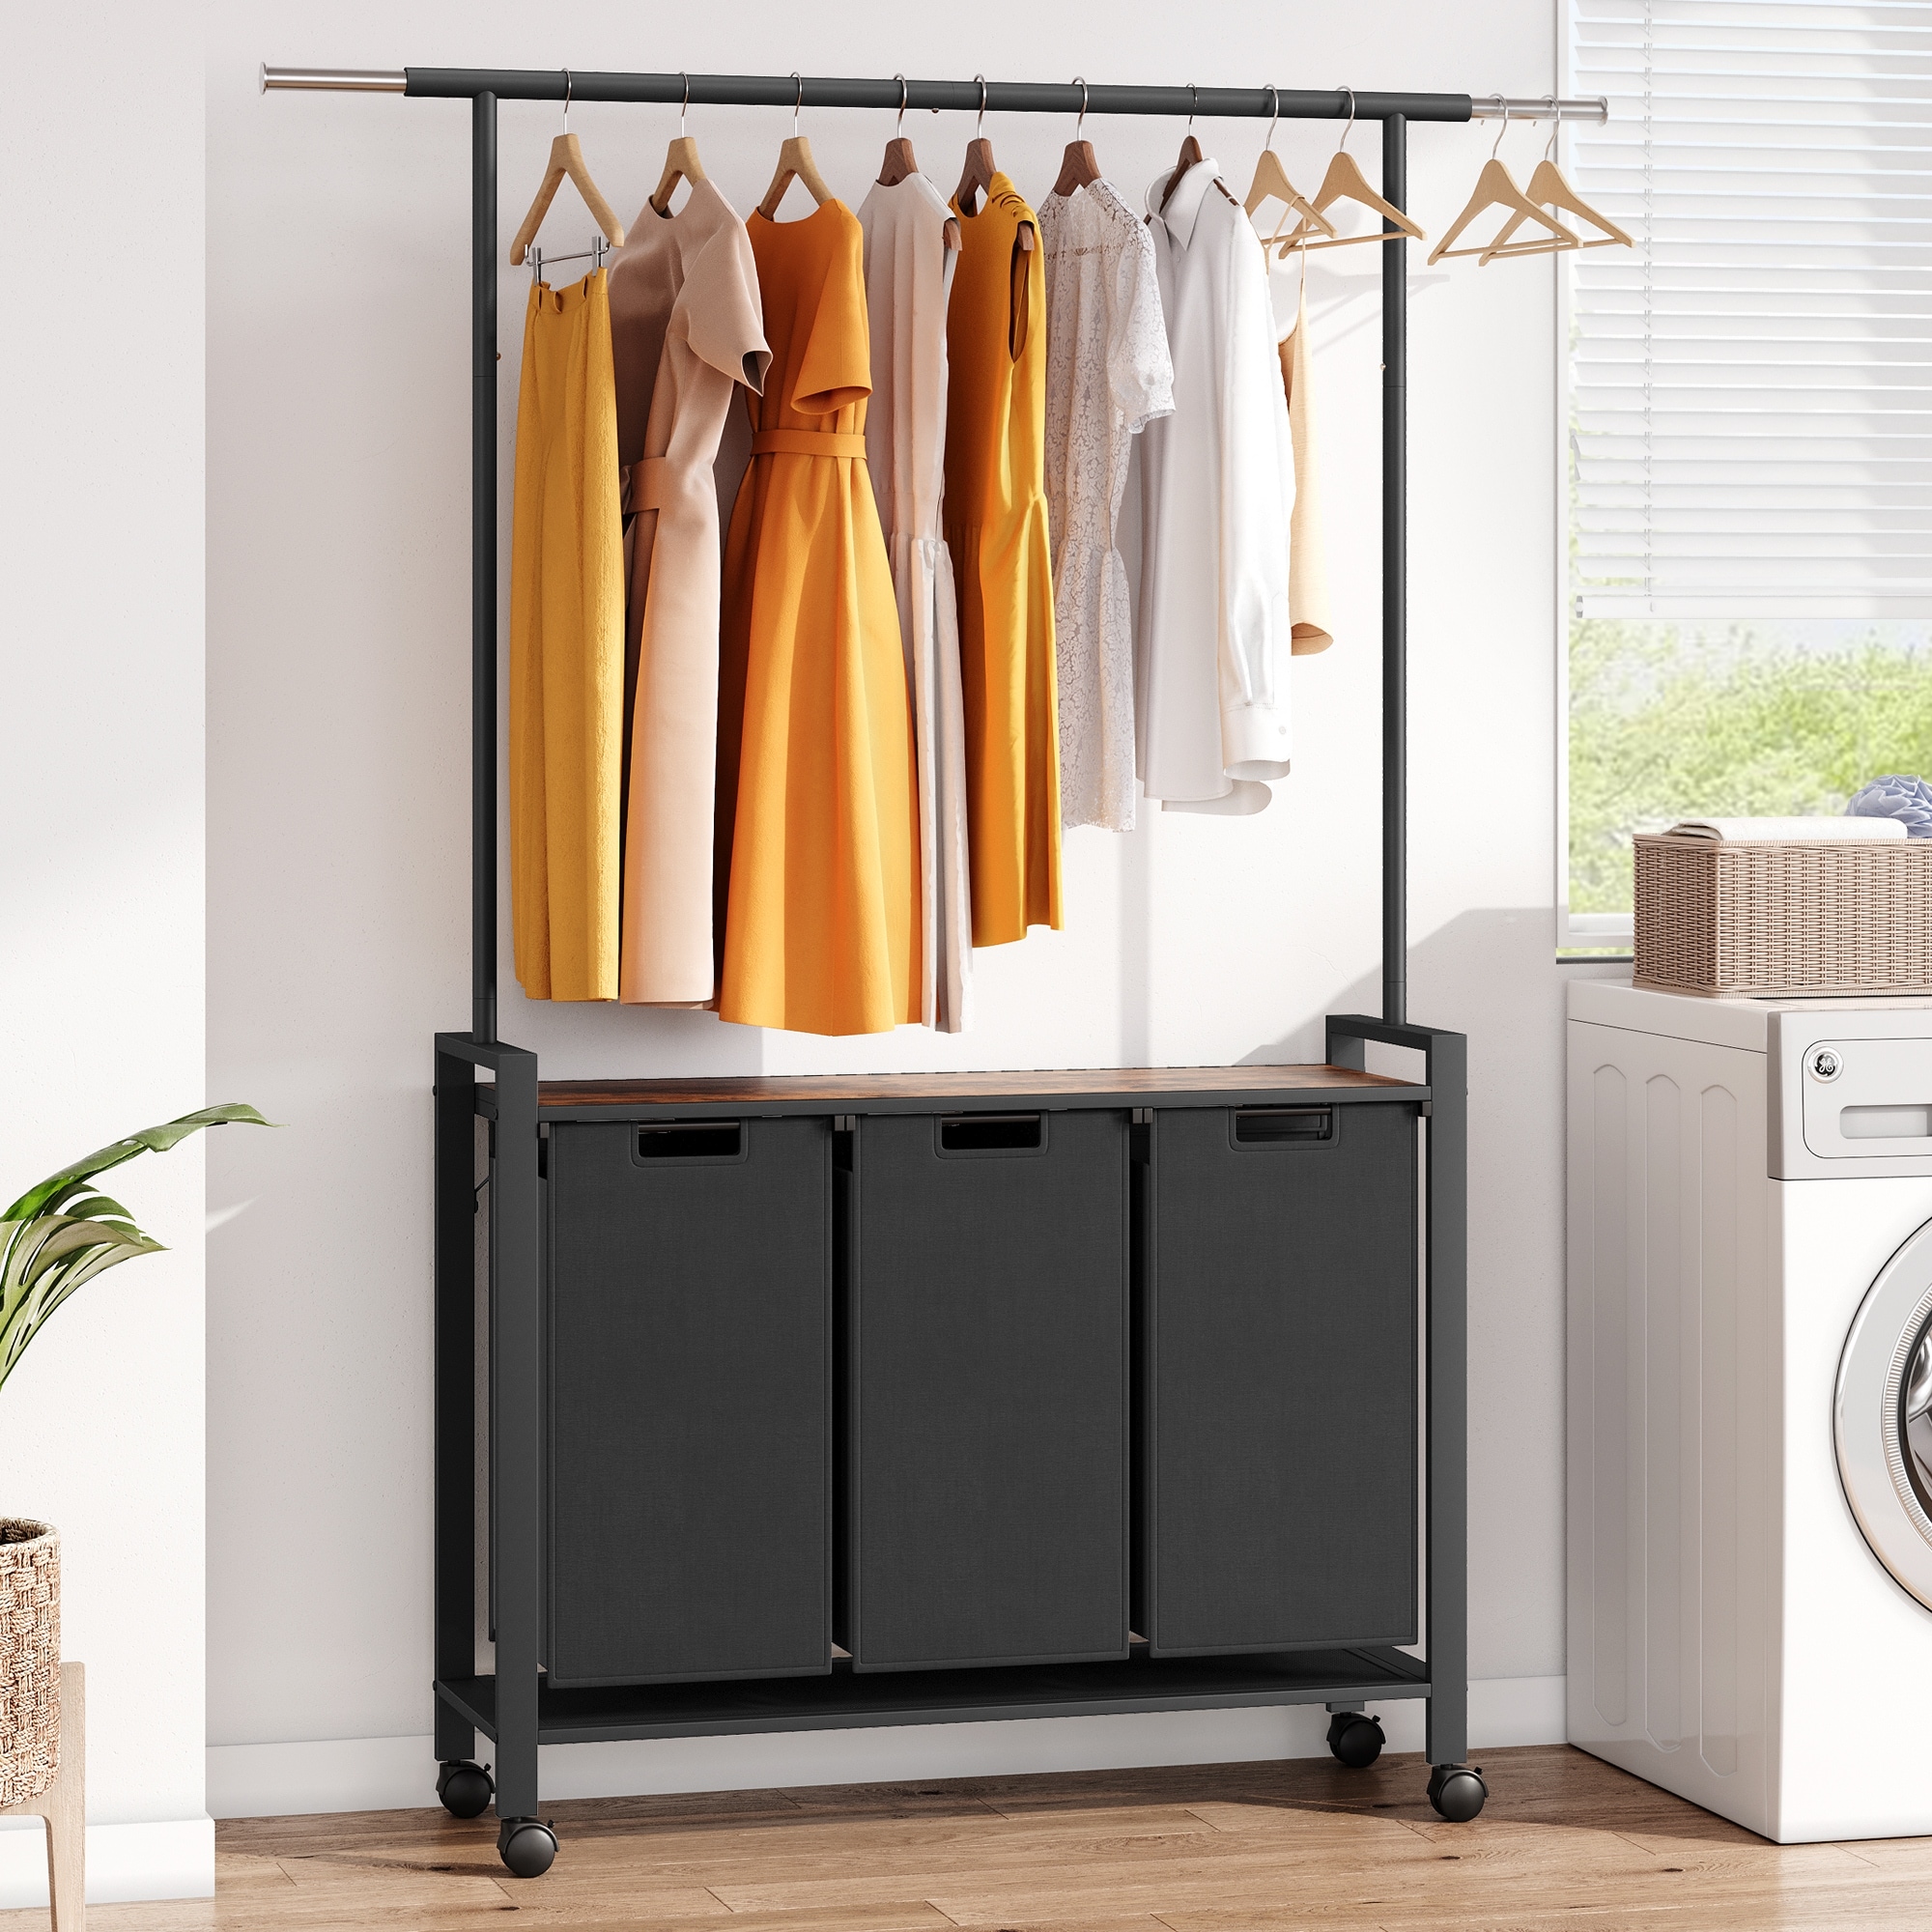 https://ak1.ostkcdn.com/images/products/is/images/direct/ba185bc0eab474ab974174219f540a77a6520a3b/3-Section-Laundry-Hamper-Sorter-Basket-Organizer-for-Laundry-Room-Organization-Storage.jpg